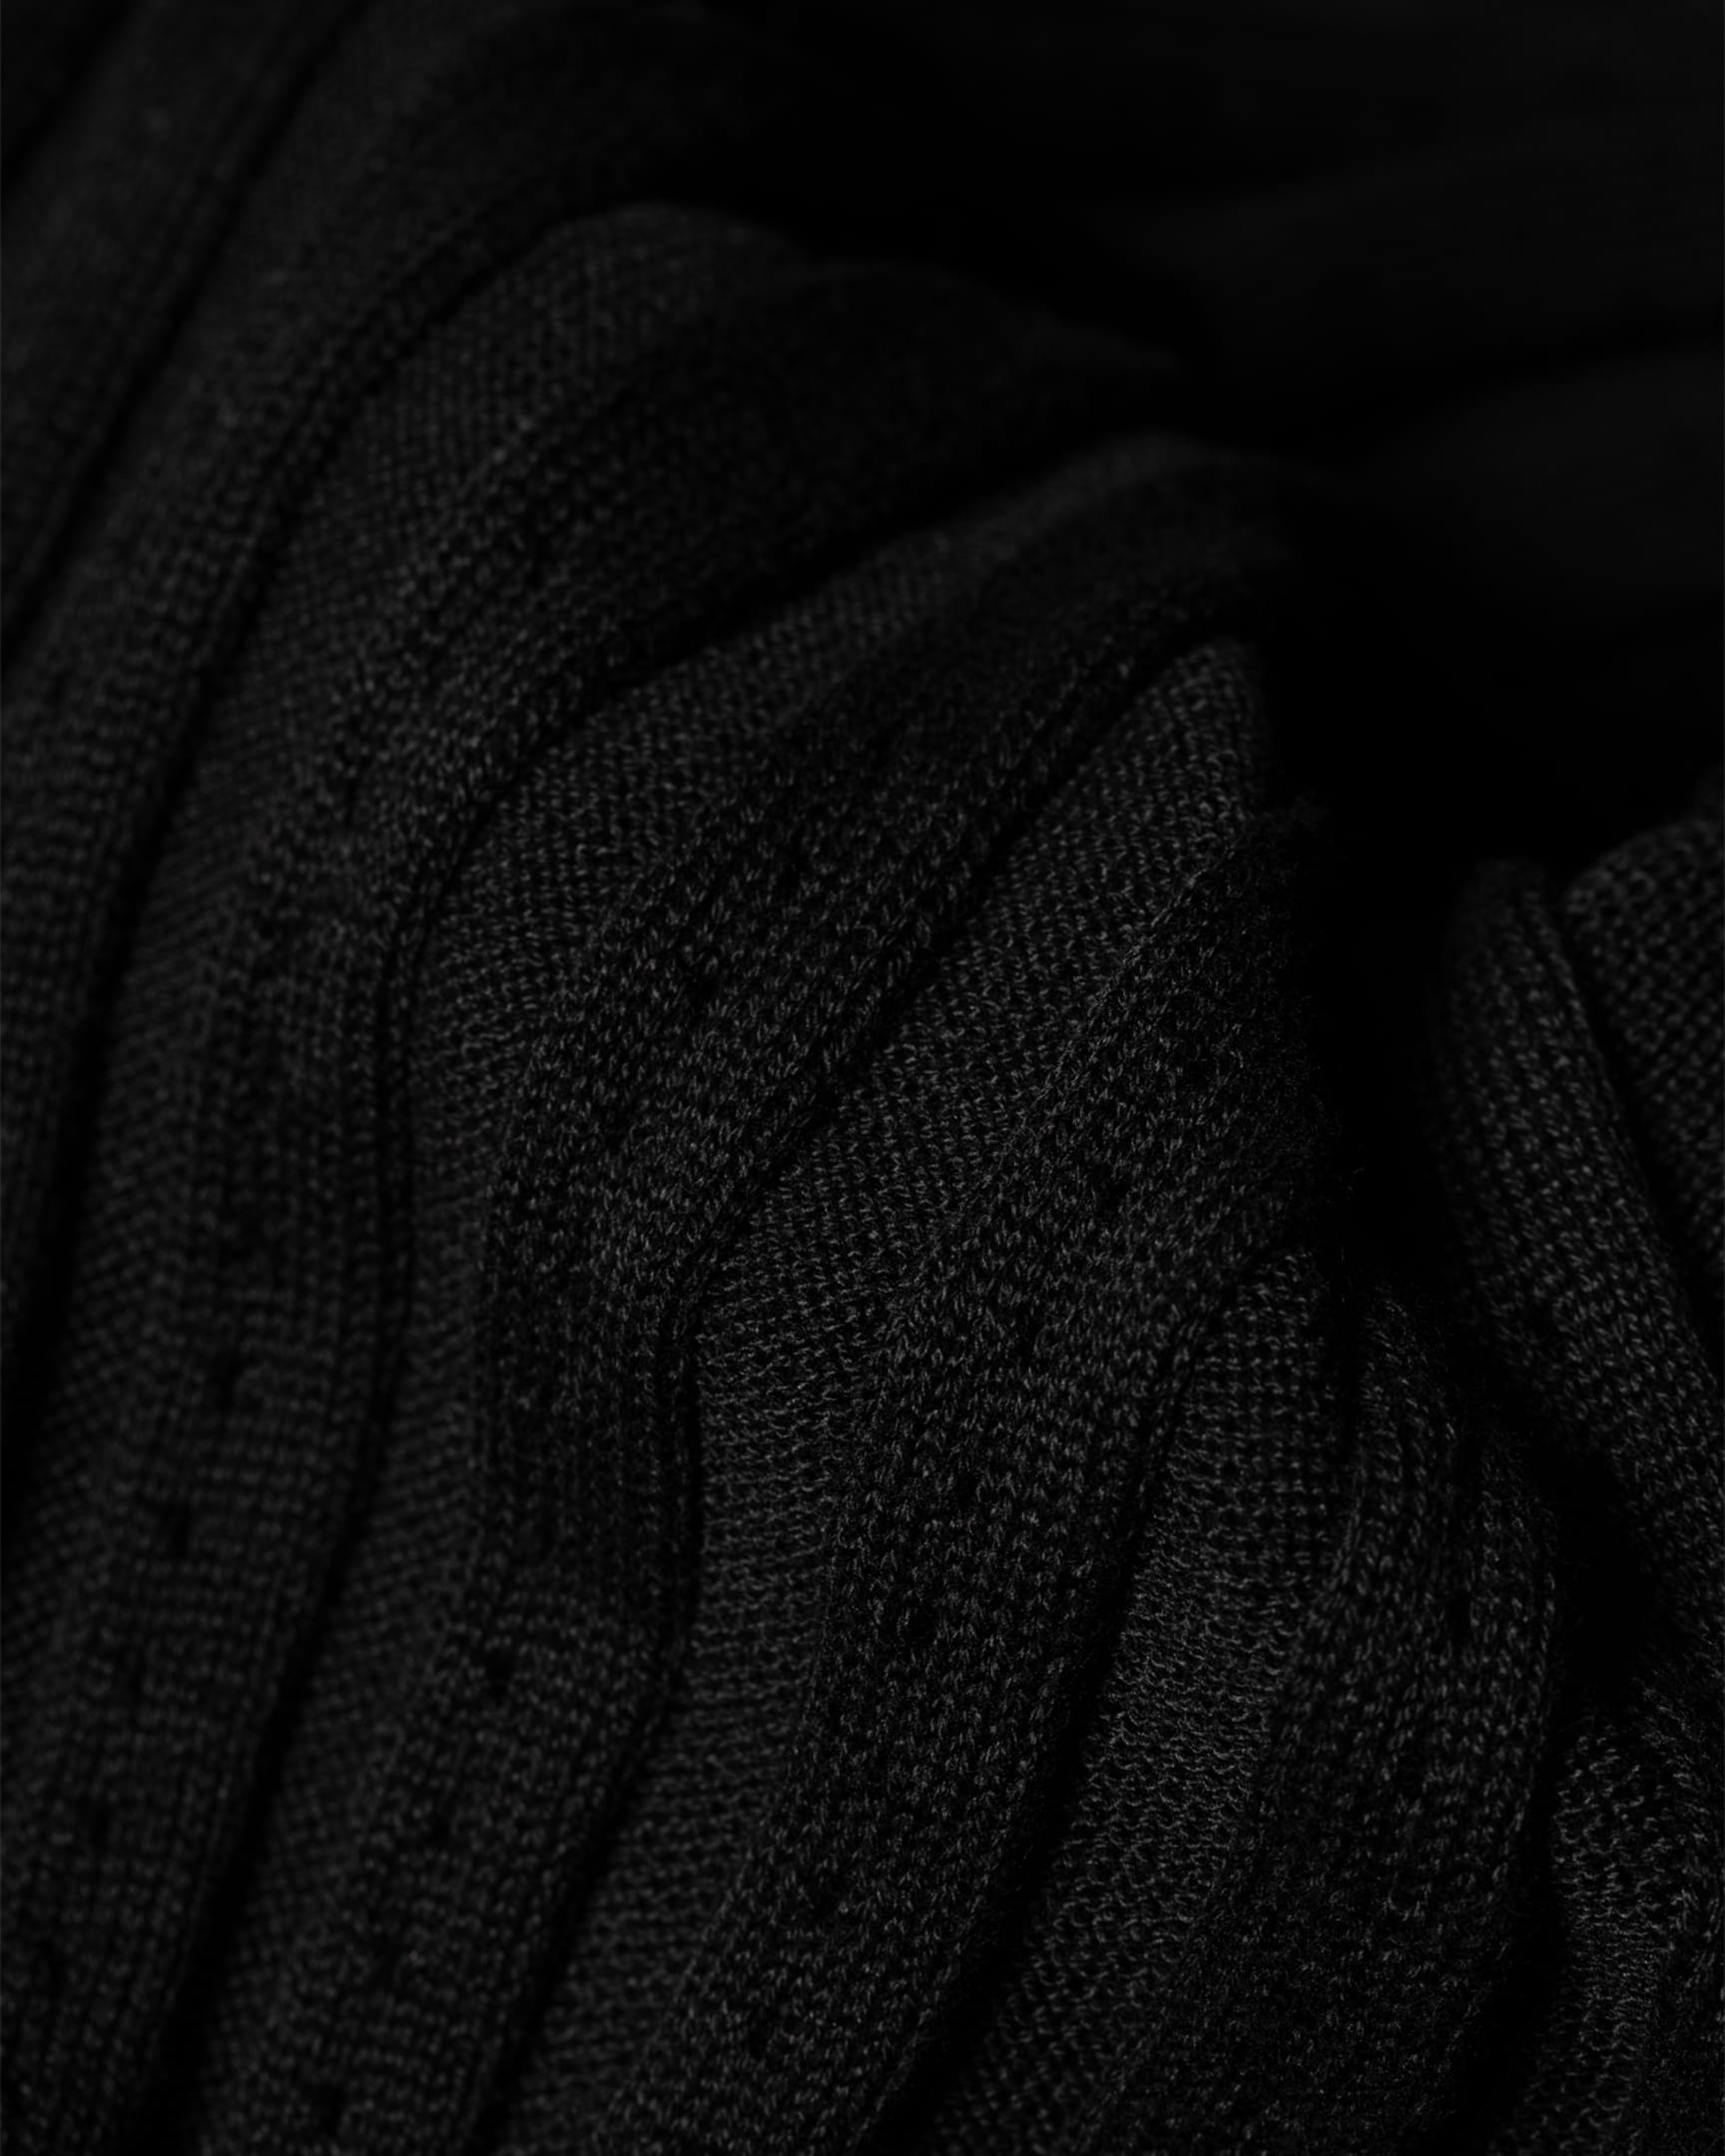 Detail View - Women's Black 'Signature Stripe' V Neck Knitted Dress Paul Smith